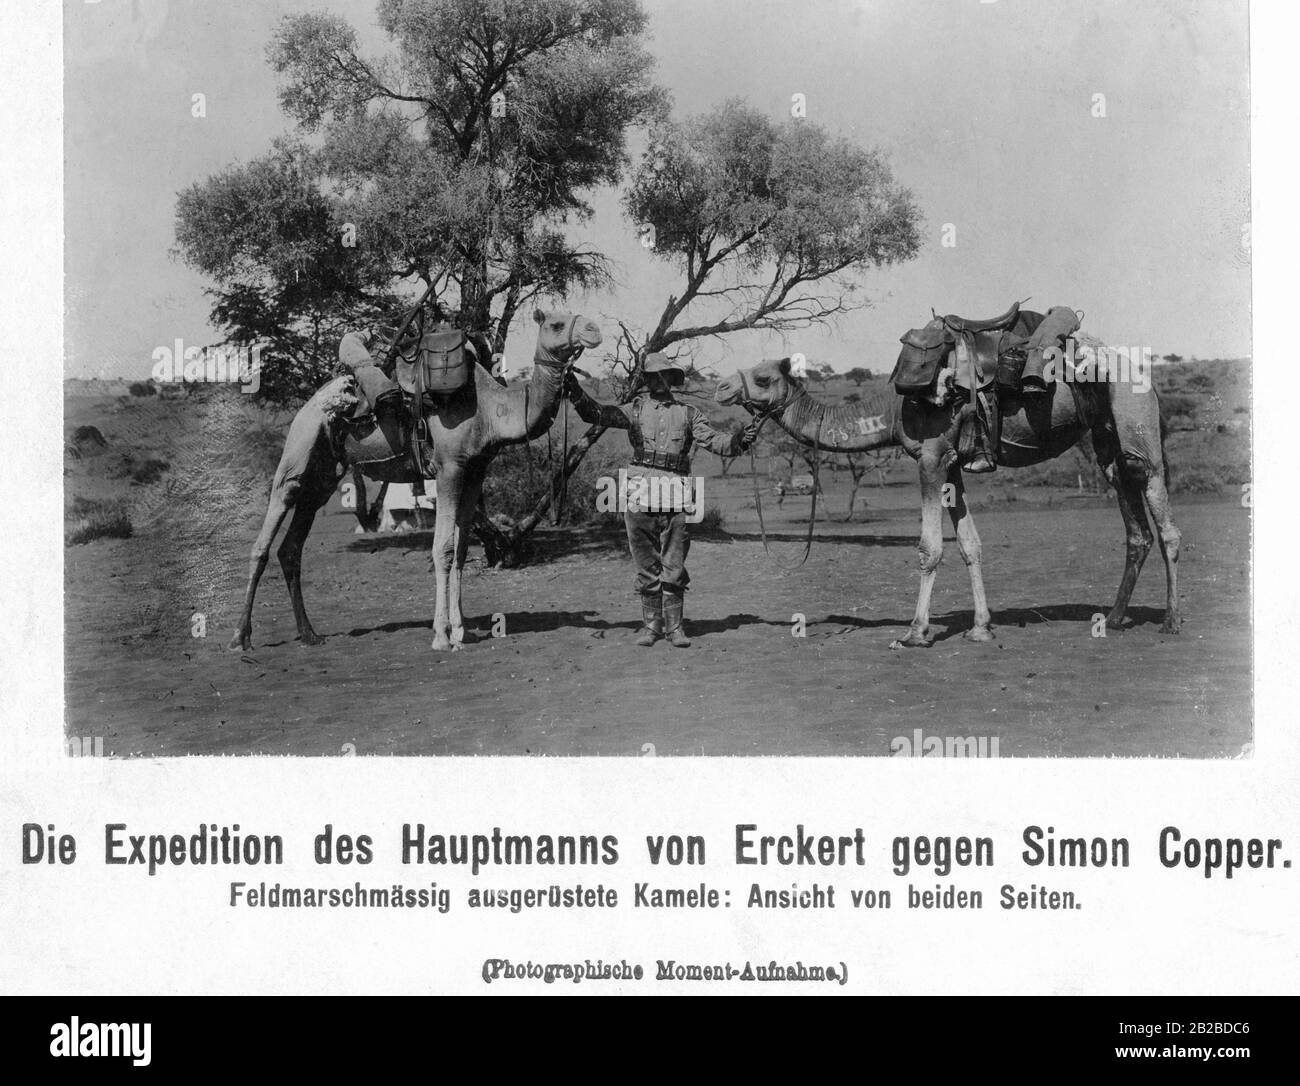 In German South West Africa, the native inhabitants rebelled against German supremacy between 1904 and 1908, first under the leadership of Hendrik Witbooi and after his death in 1905, under Simon Copper.  The German campaign under Captain Friedrich von Erckert was directed against them. The picture shows camels of the German Schutztruppe equipped for the field march. Stock Photo